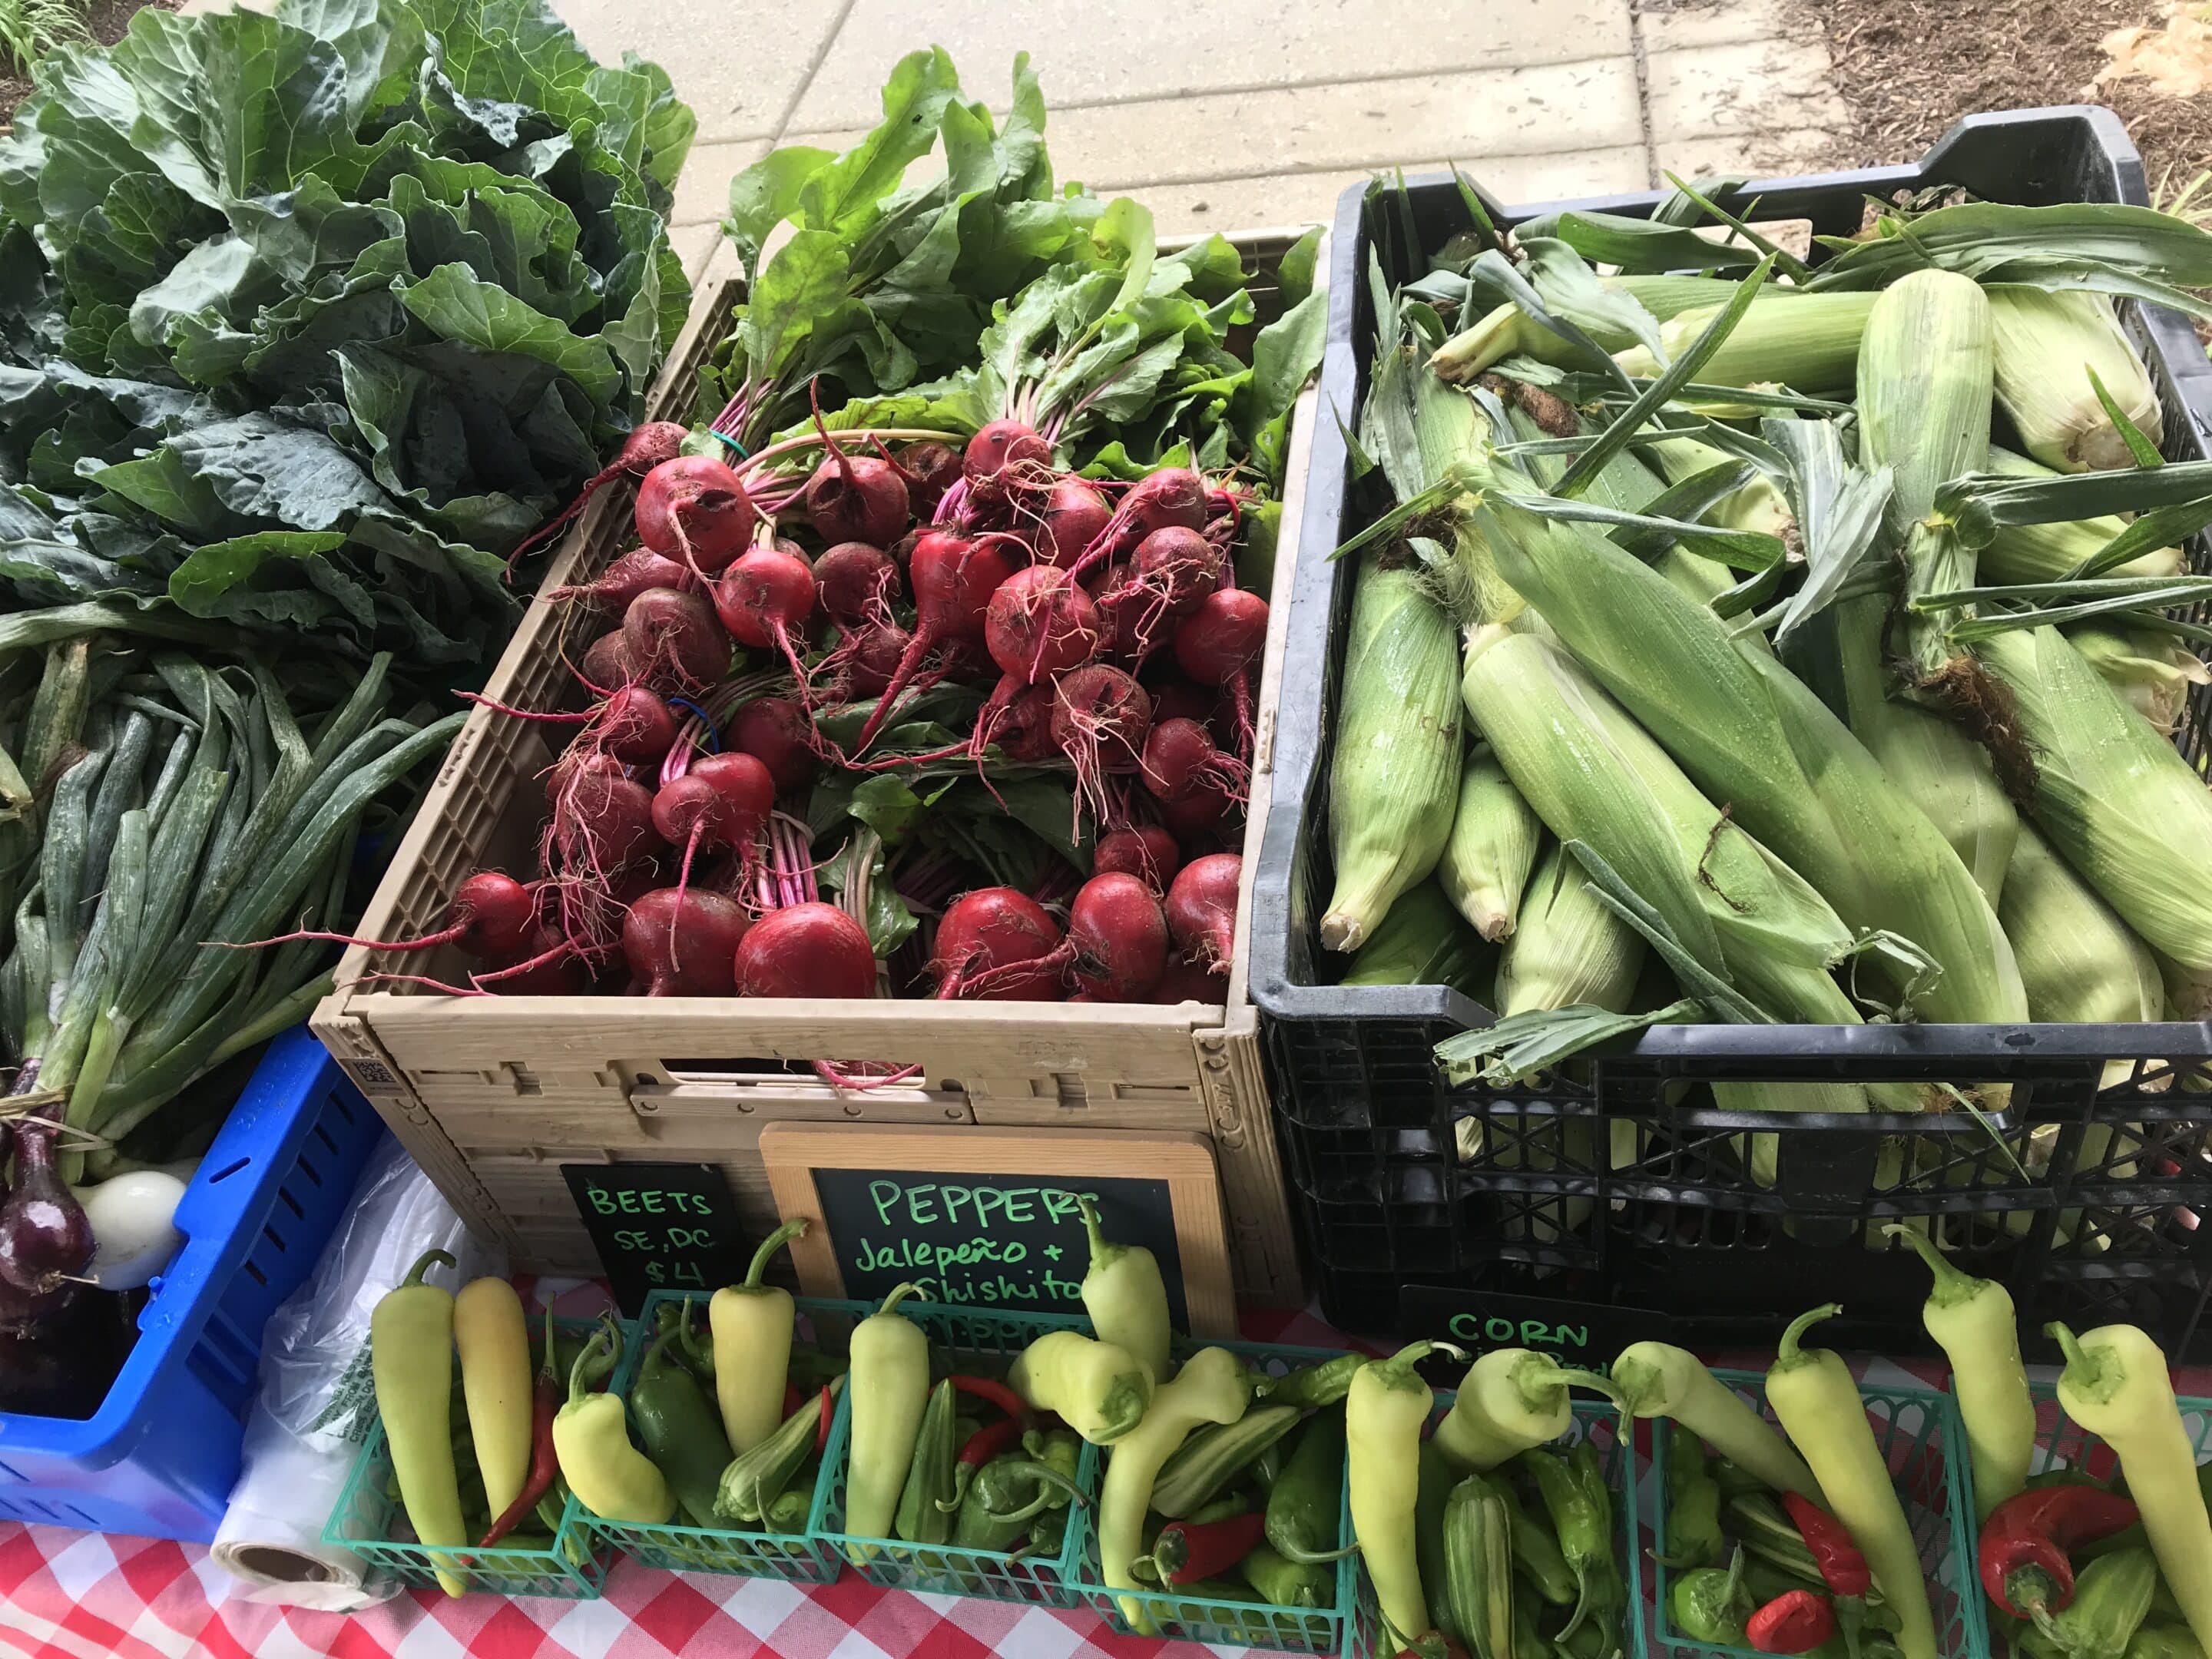 Fresh produce including beets, corn, and peppers displayed on tables at a farmers market.